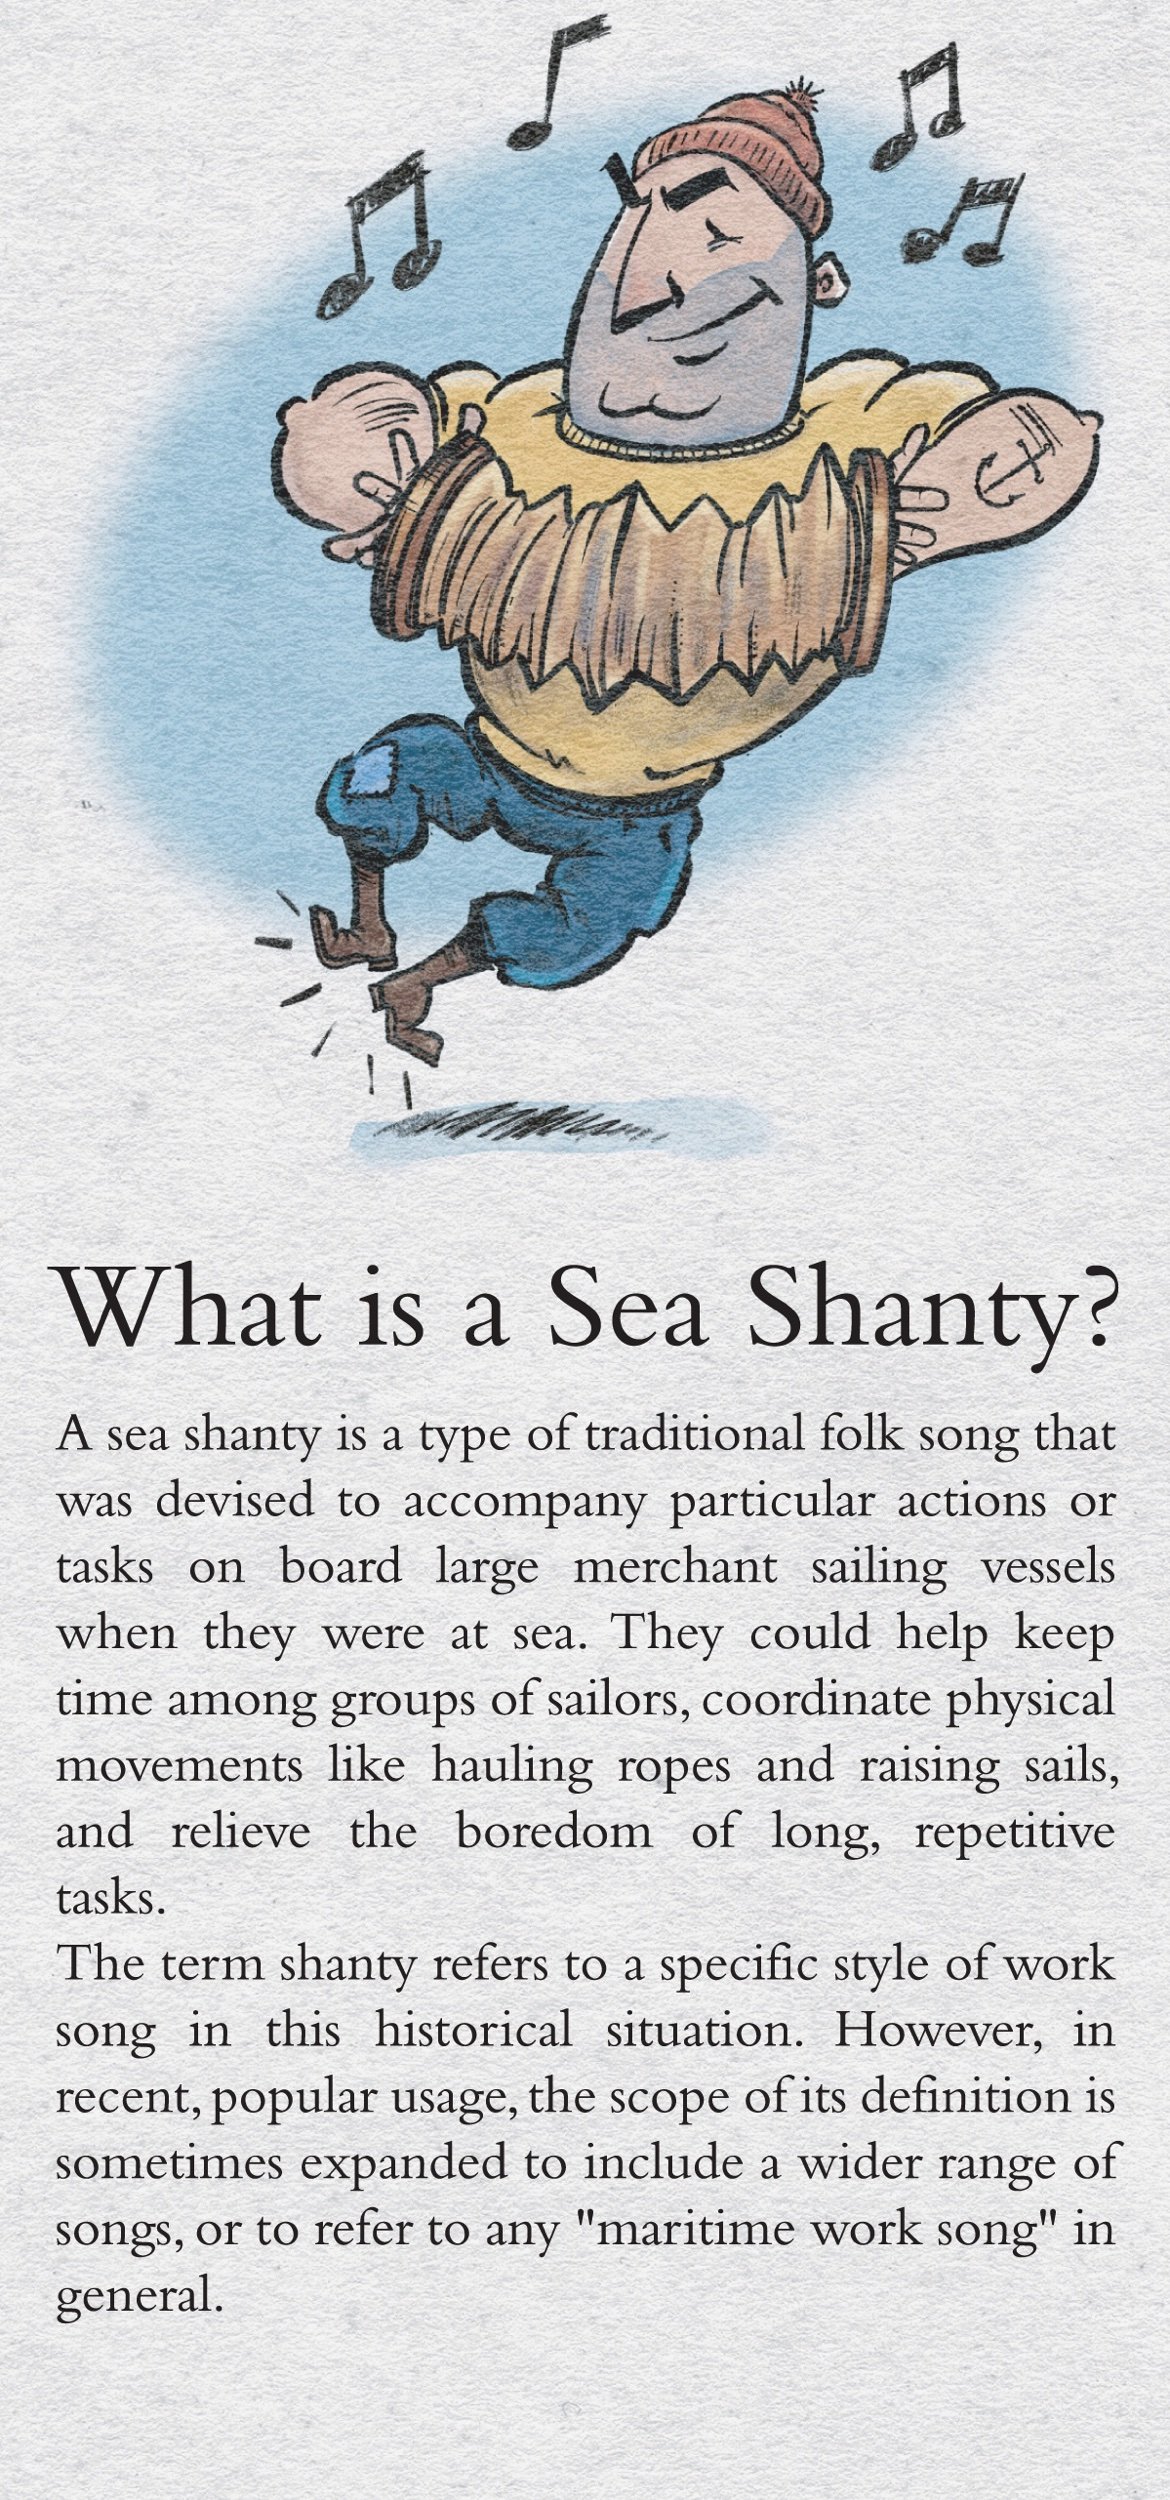 What is a Sea Shanty